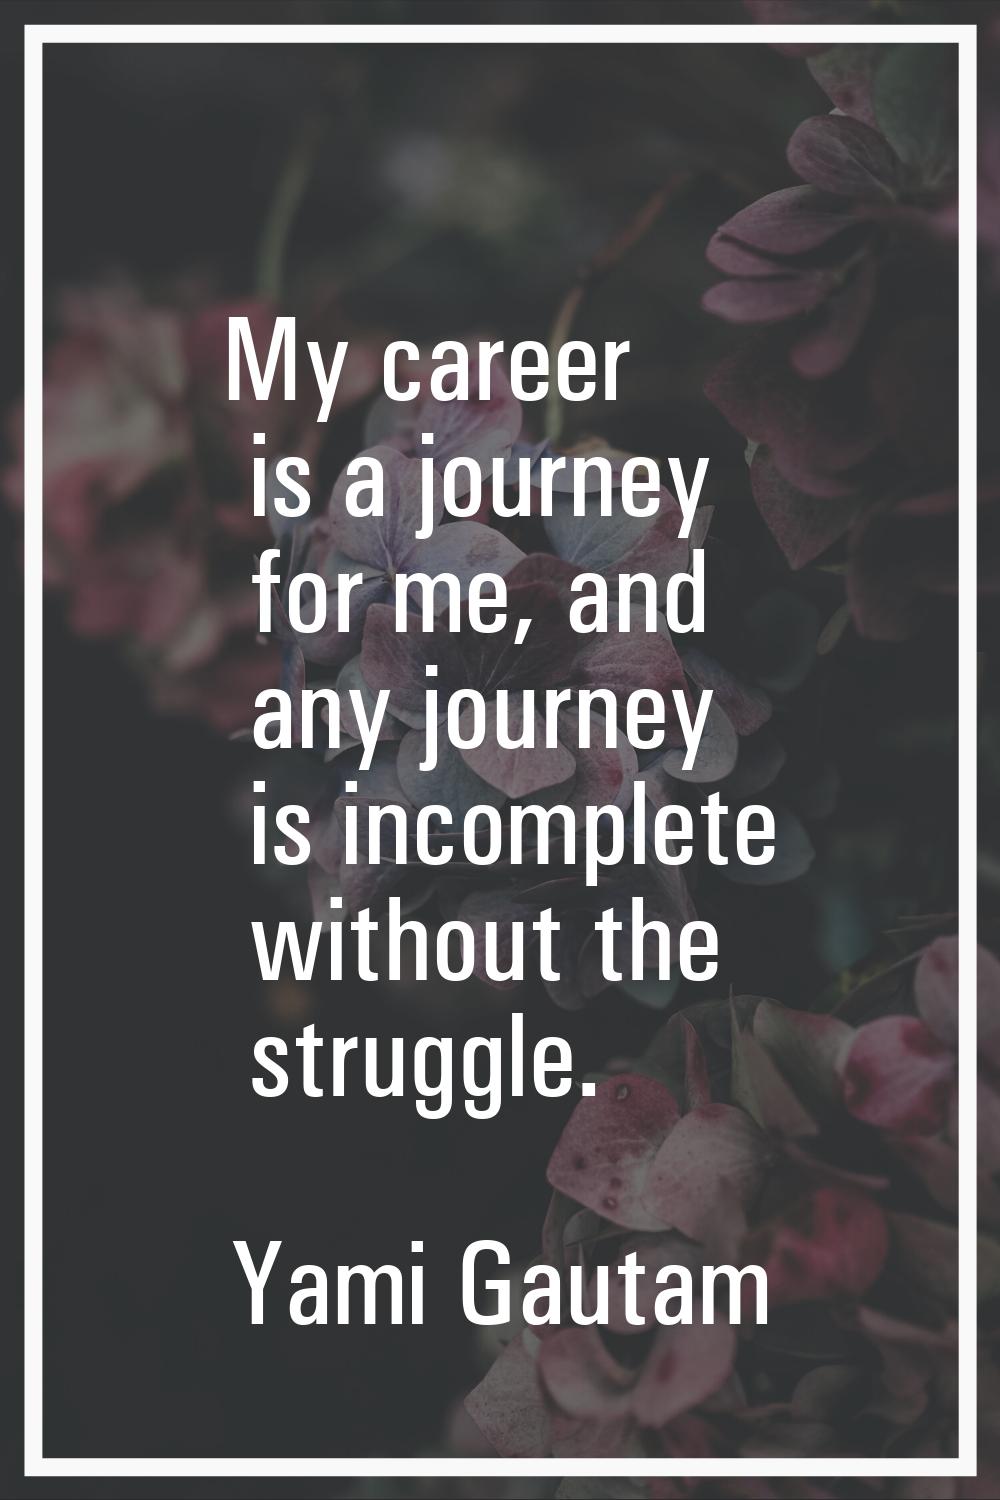 My career is a journey for me, and any journey is incomplete without the struggle.